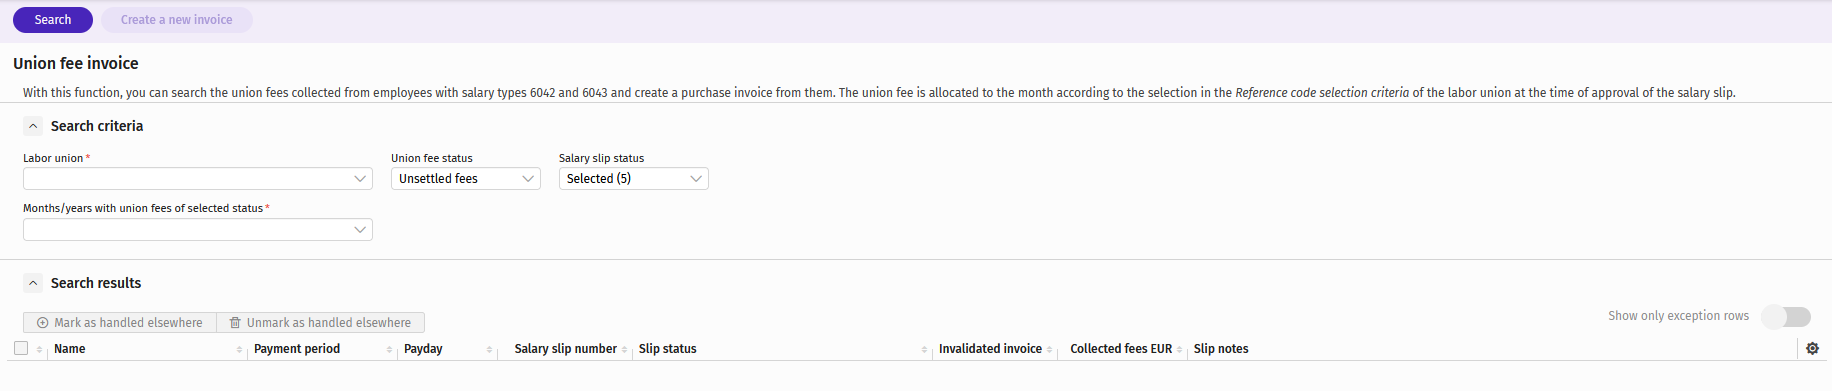 UnionFeeInvoice.png